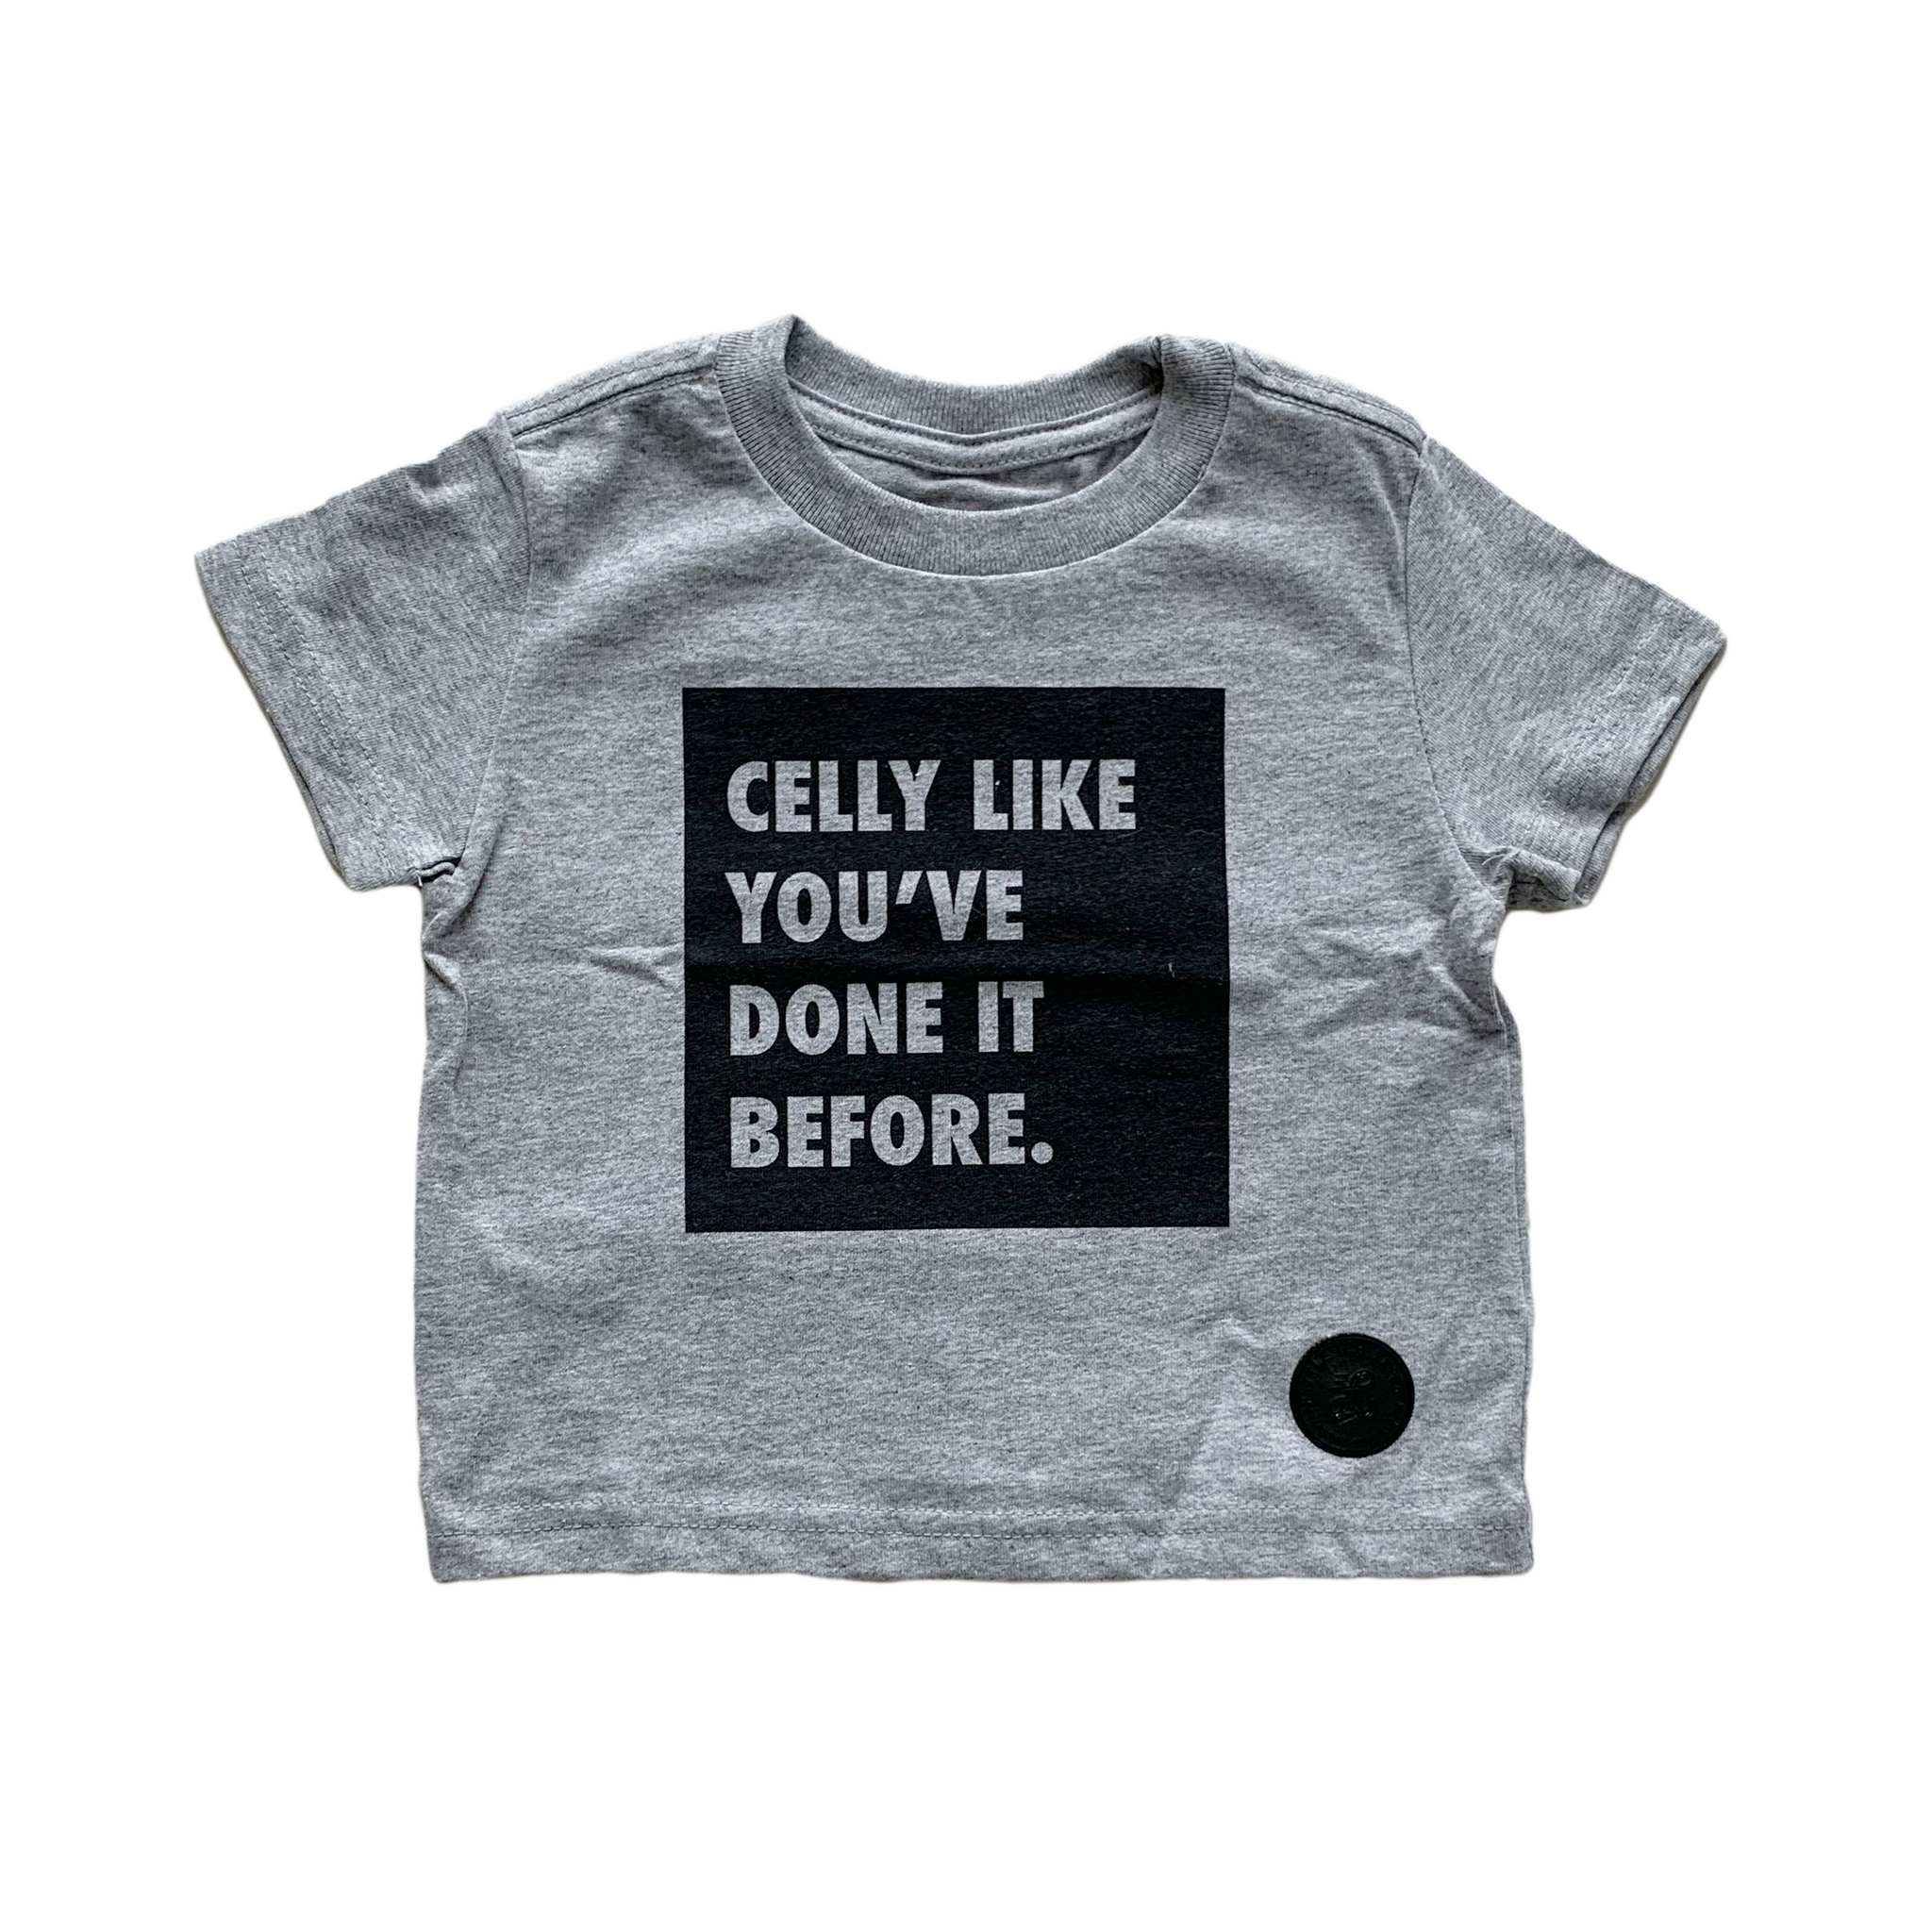 Celly Like You've Done It Before Kids Tee